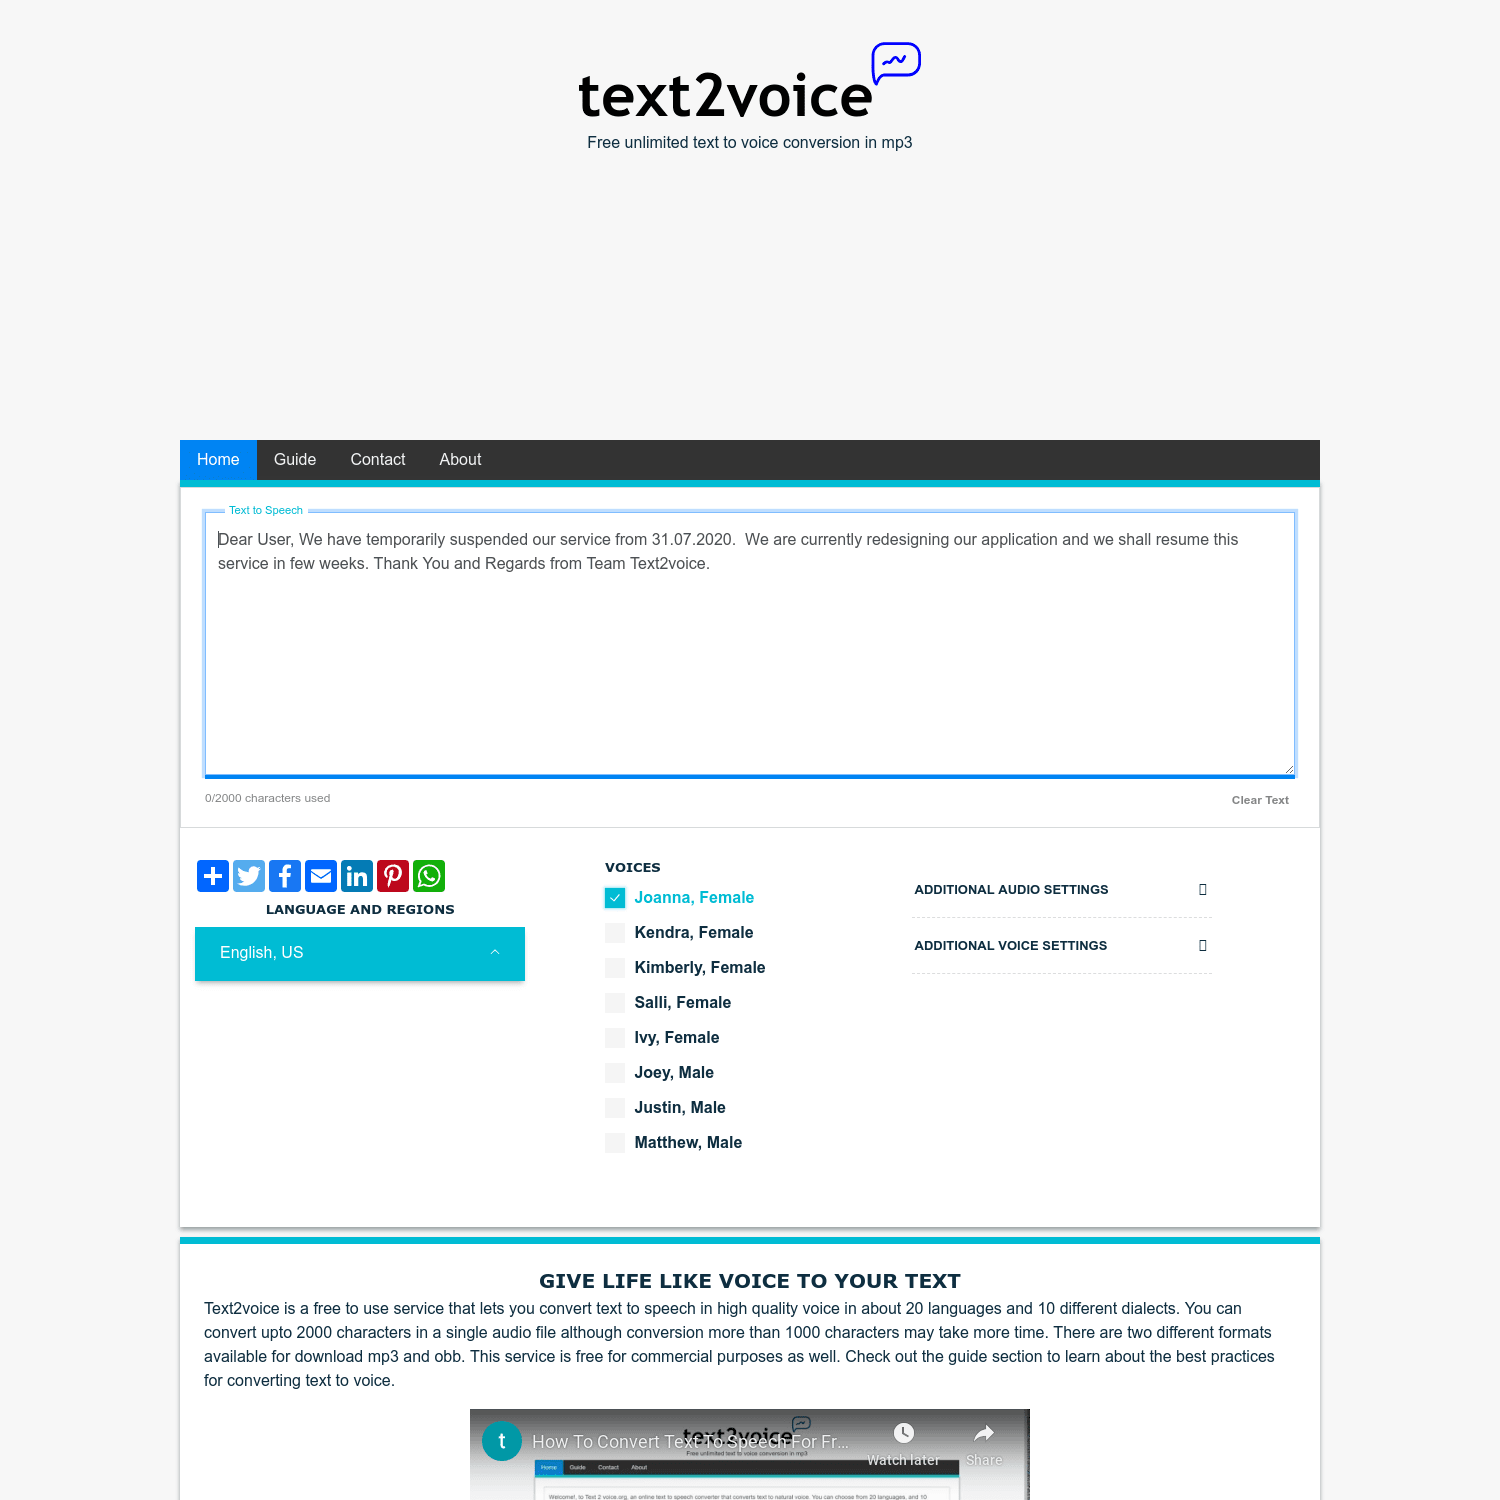 Convert your text to voice for free